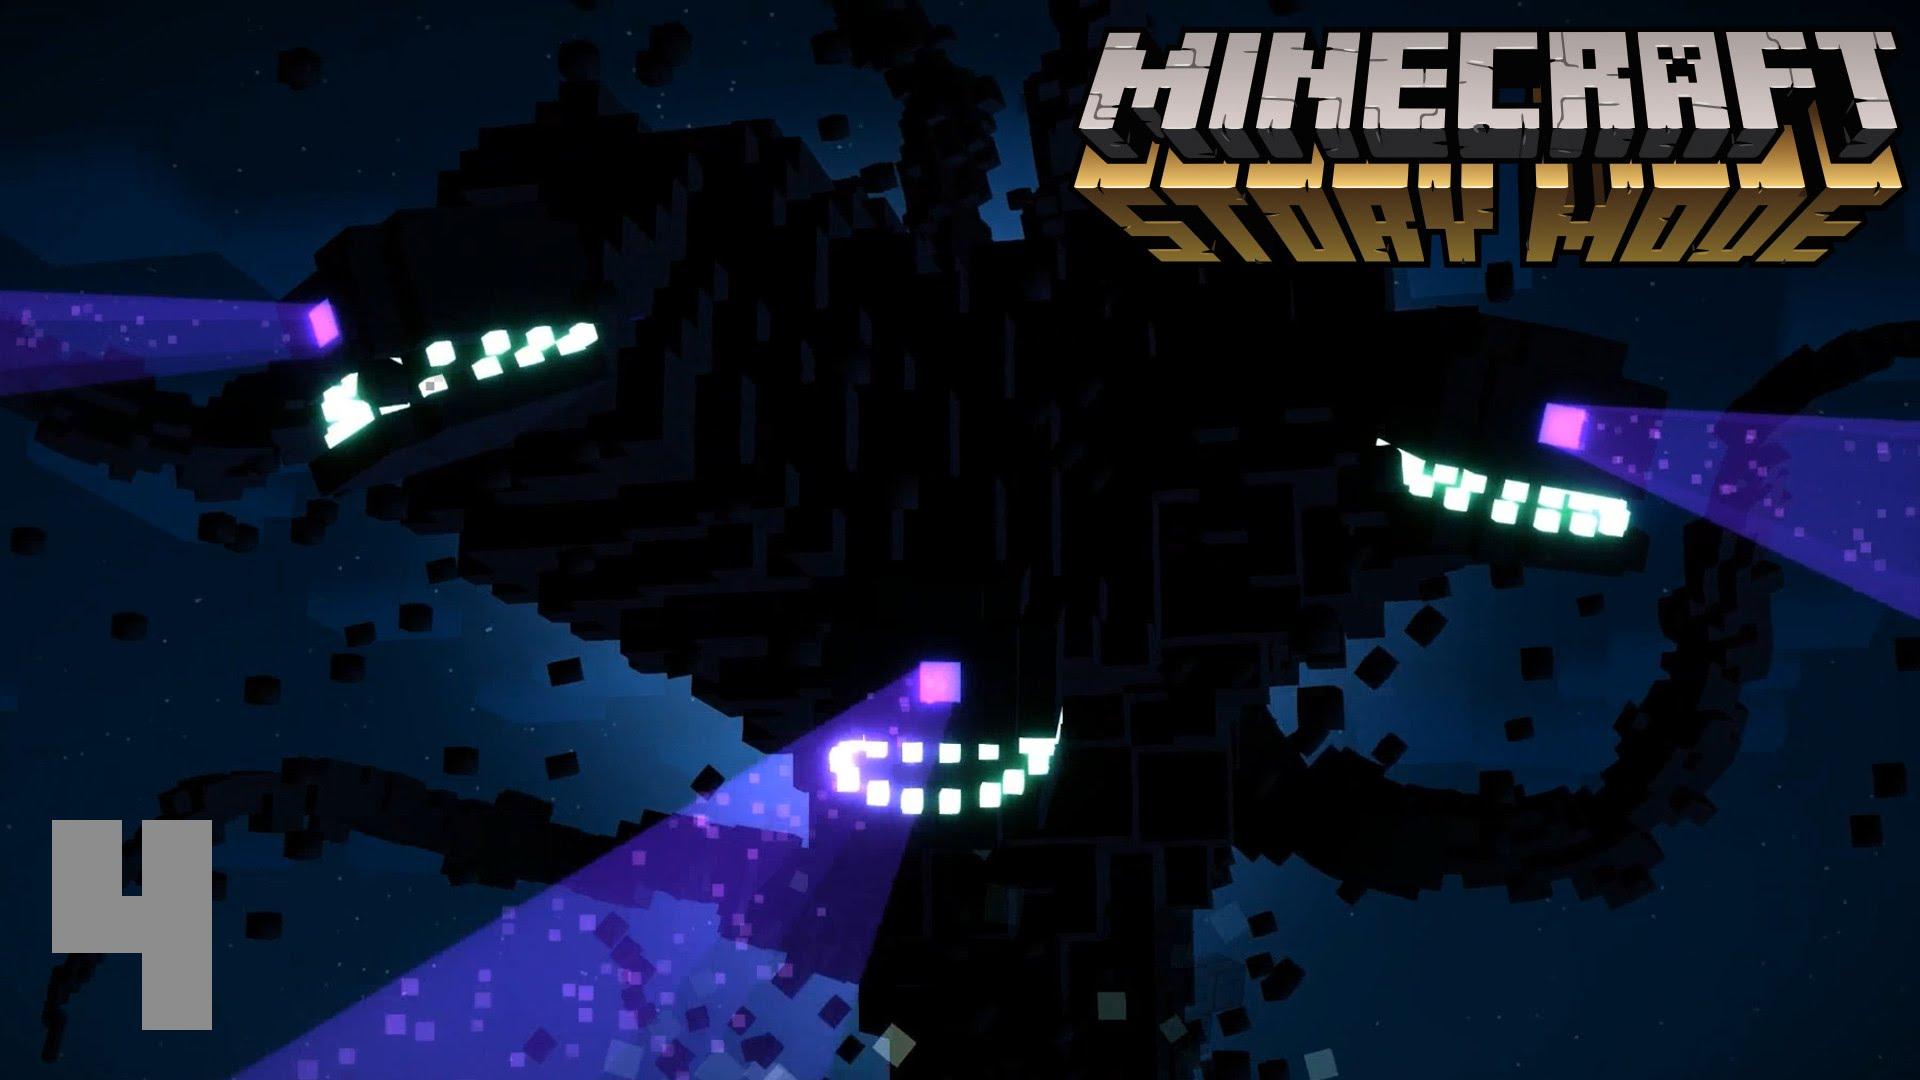 Wither Wallpaper. Wither Boss Wallpaper